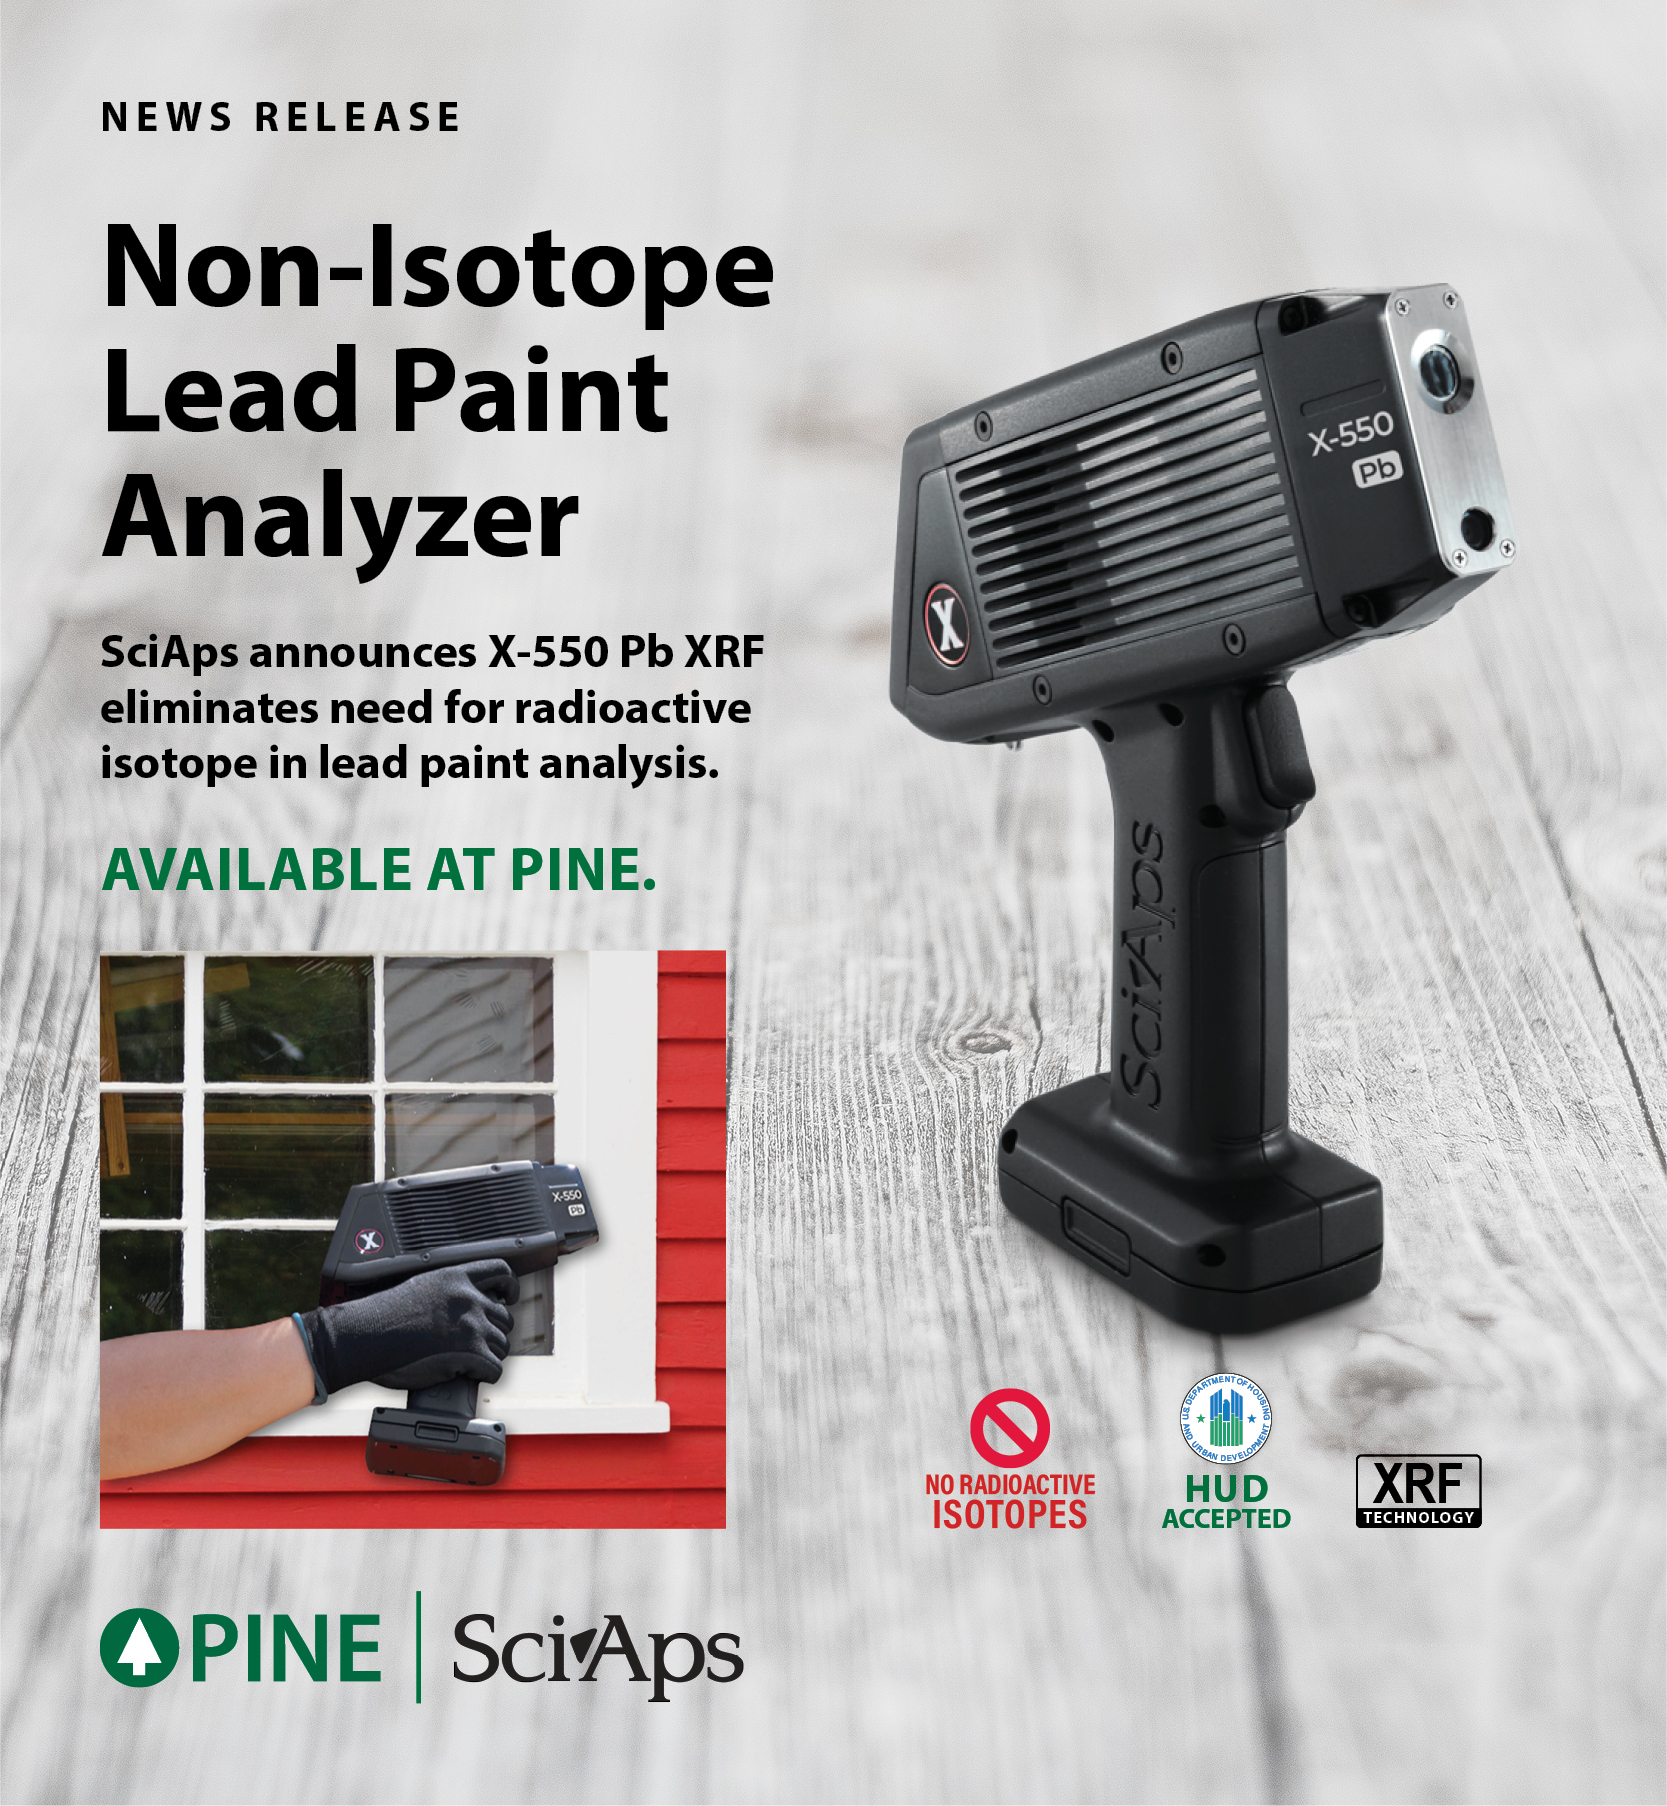 hud-approves-lead-in-paint-characteristic-sheet-for-sciaps-x-550-xrf